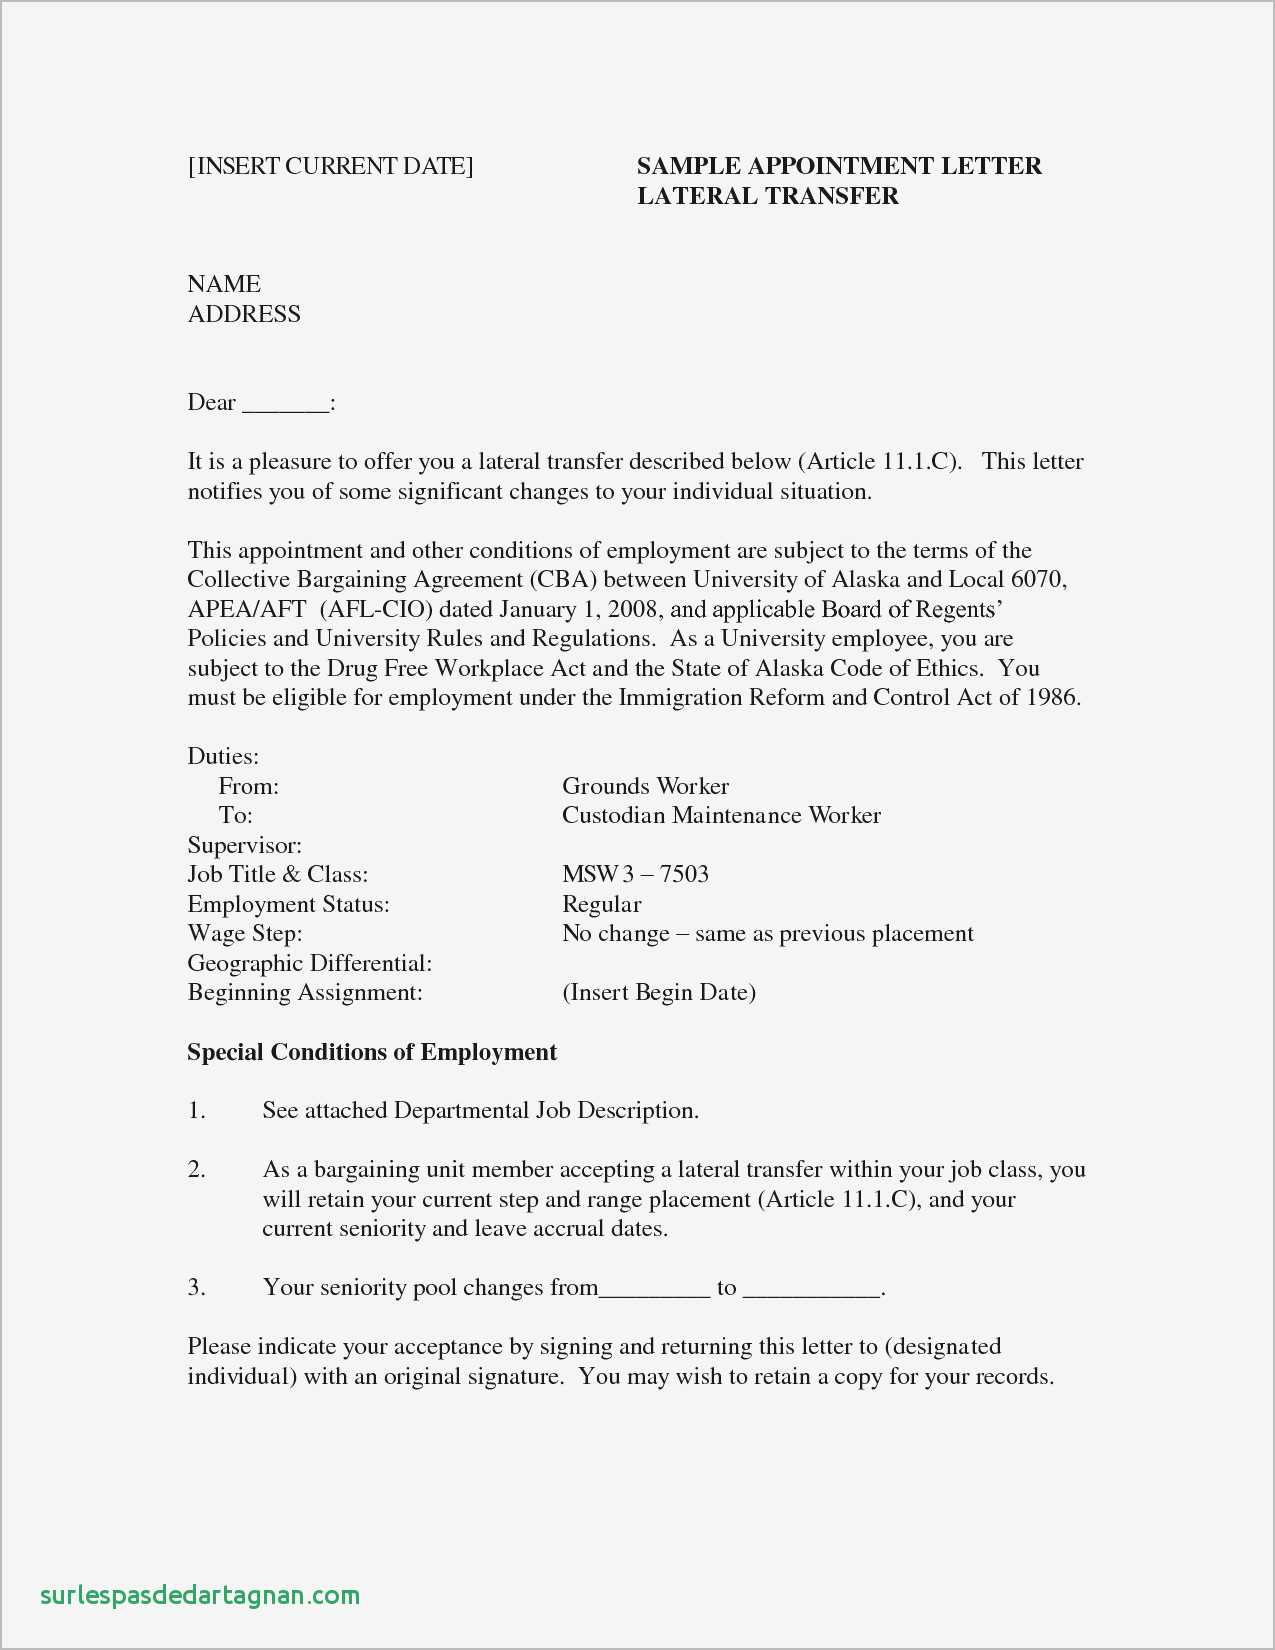 New Hire Letter Template - Job Fer Letter Template Us Copy Od Consultant Cover Letter Fungram